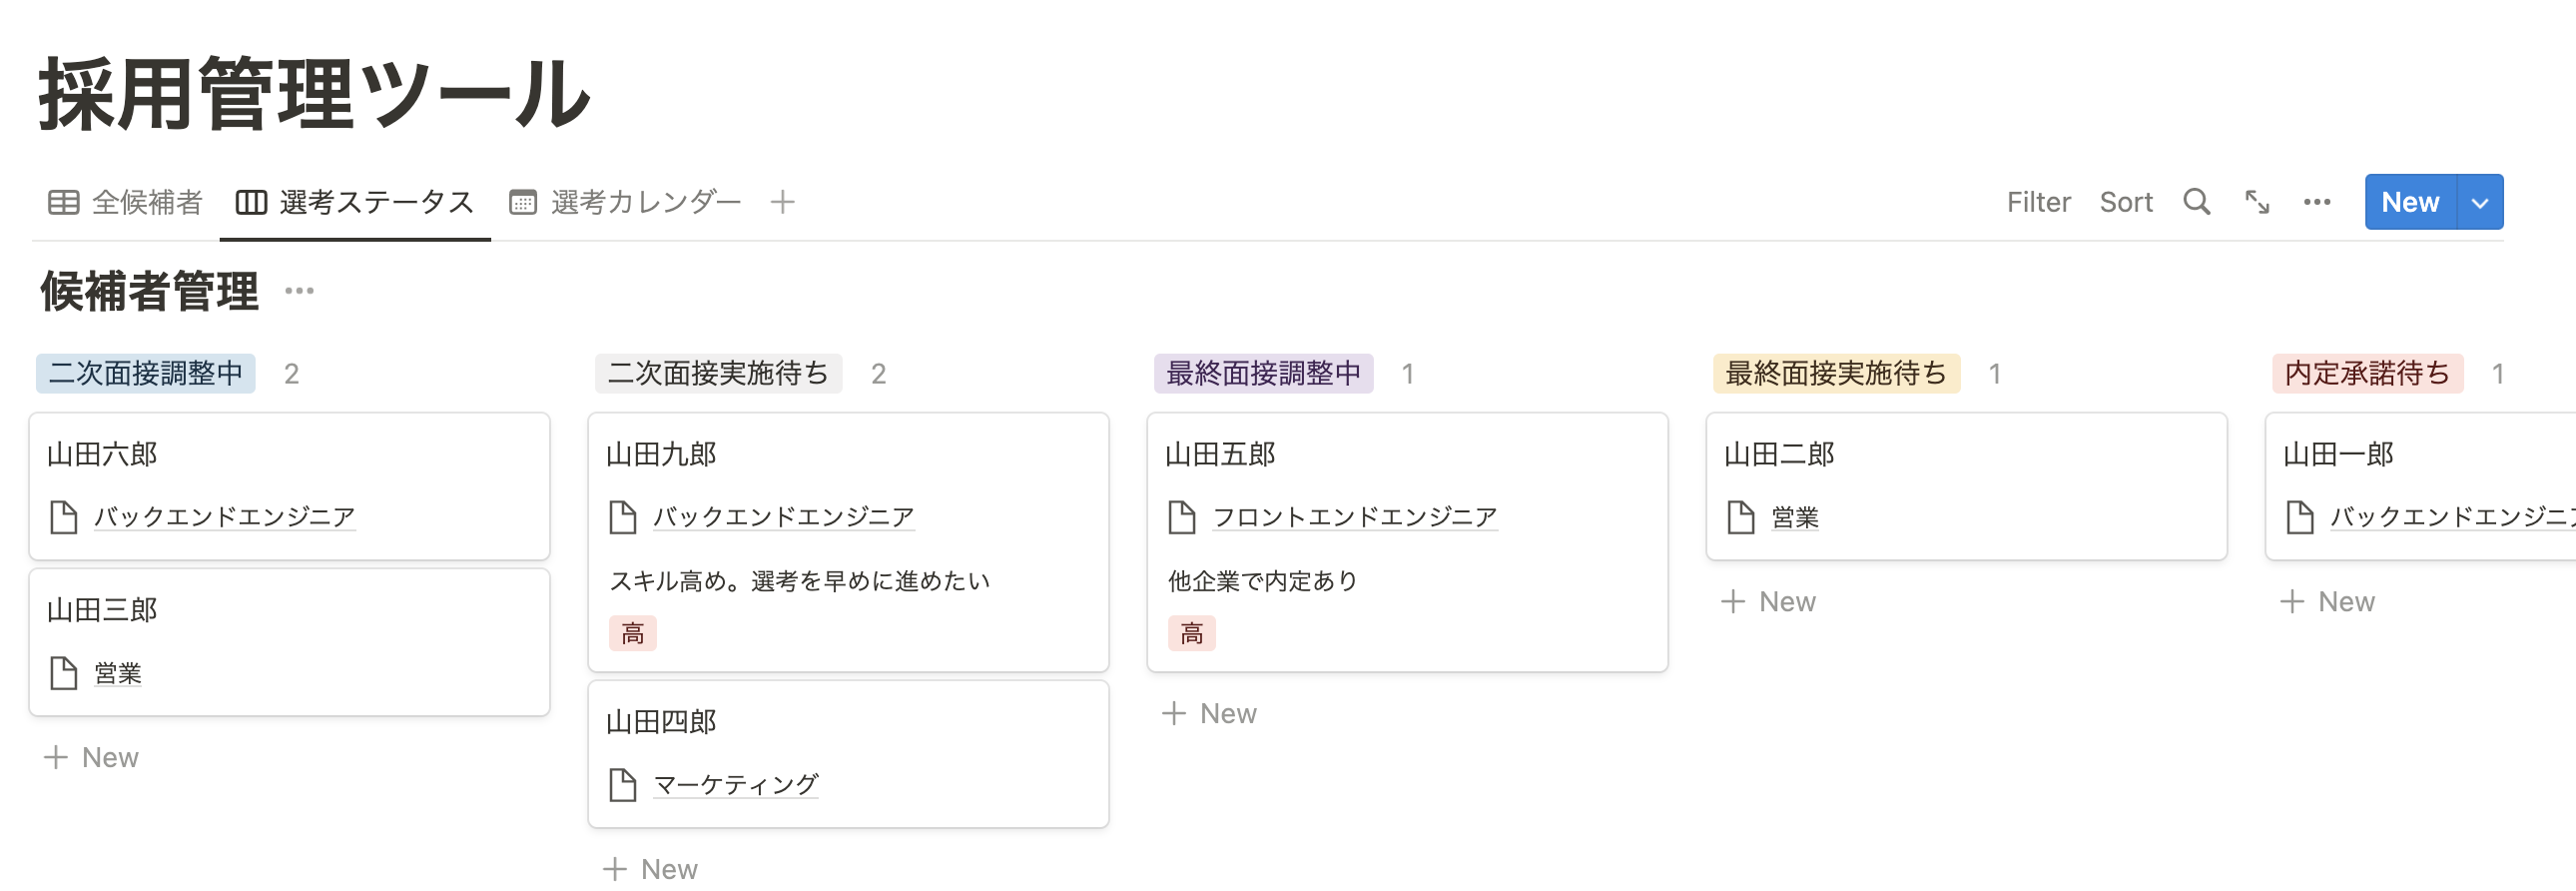 notionで採用管理